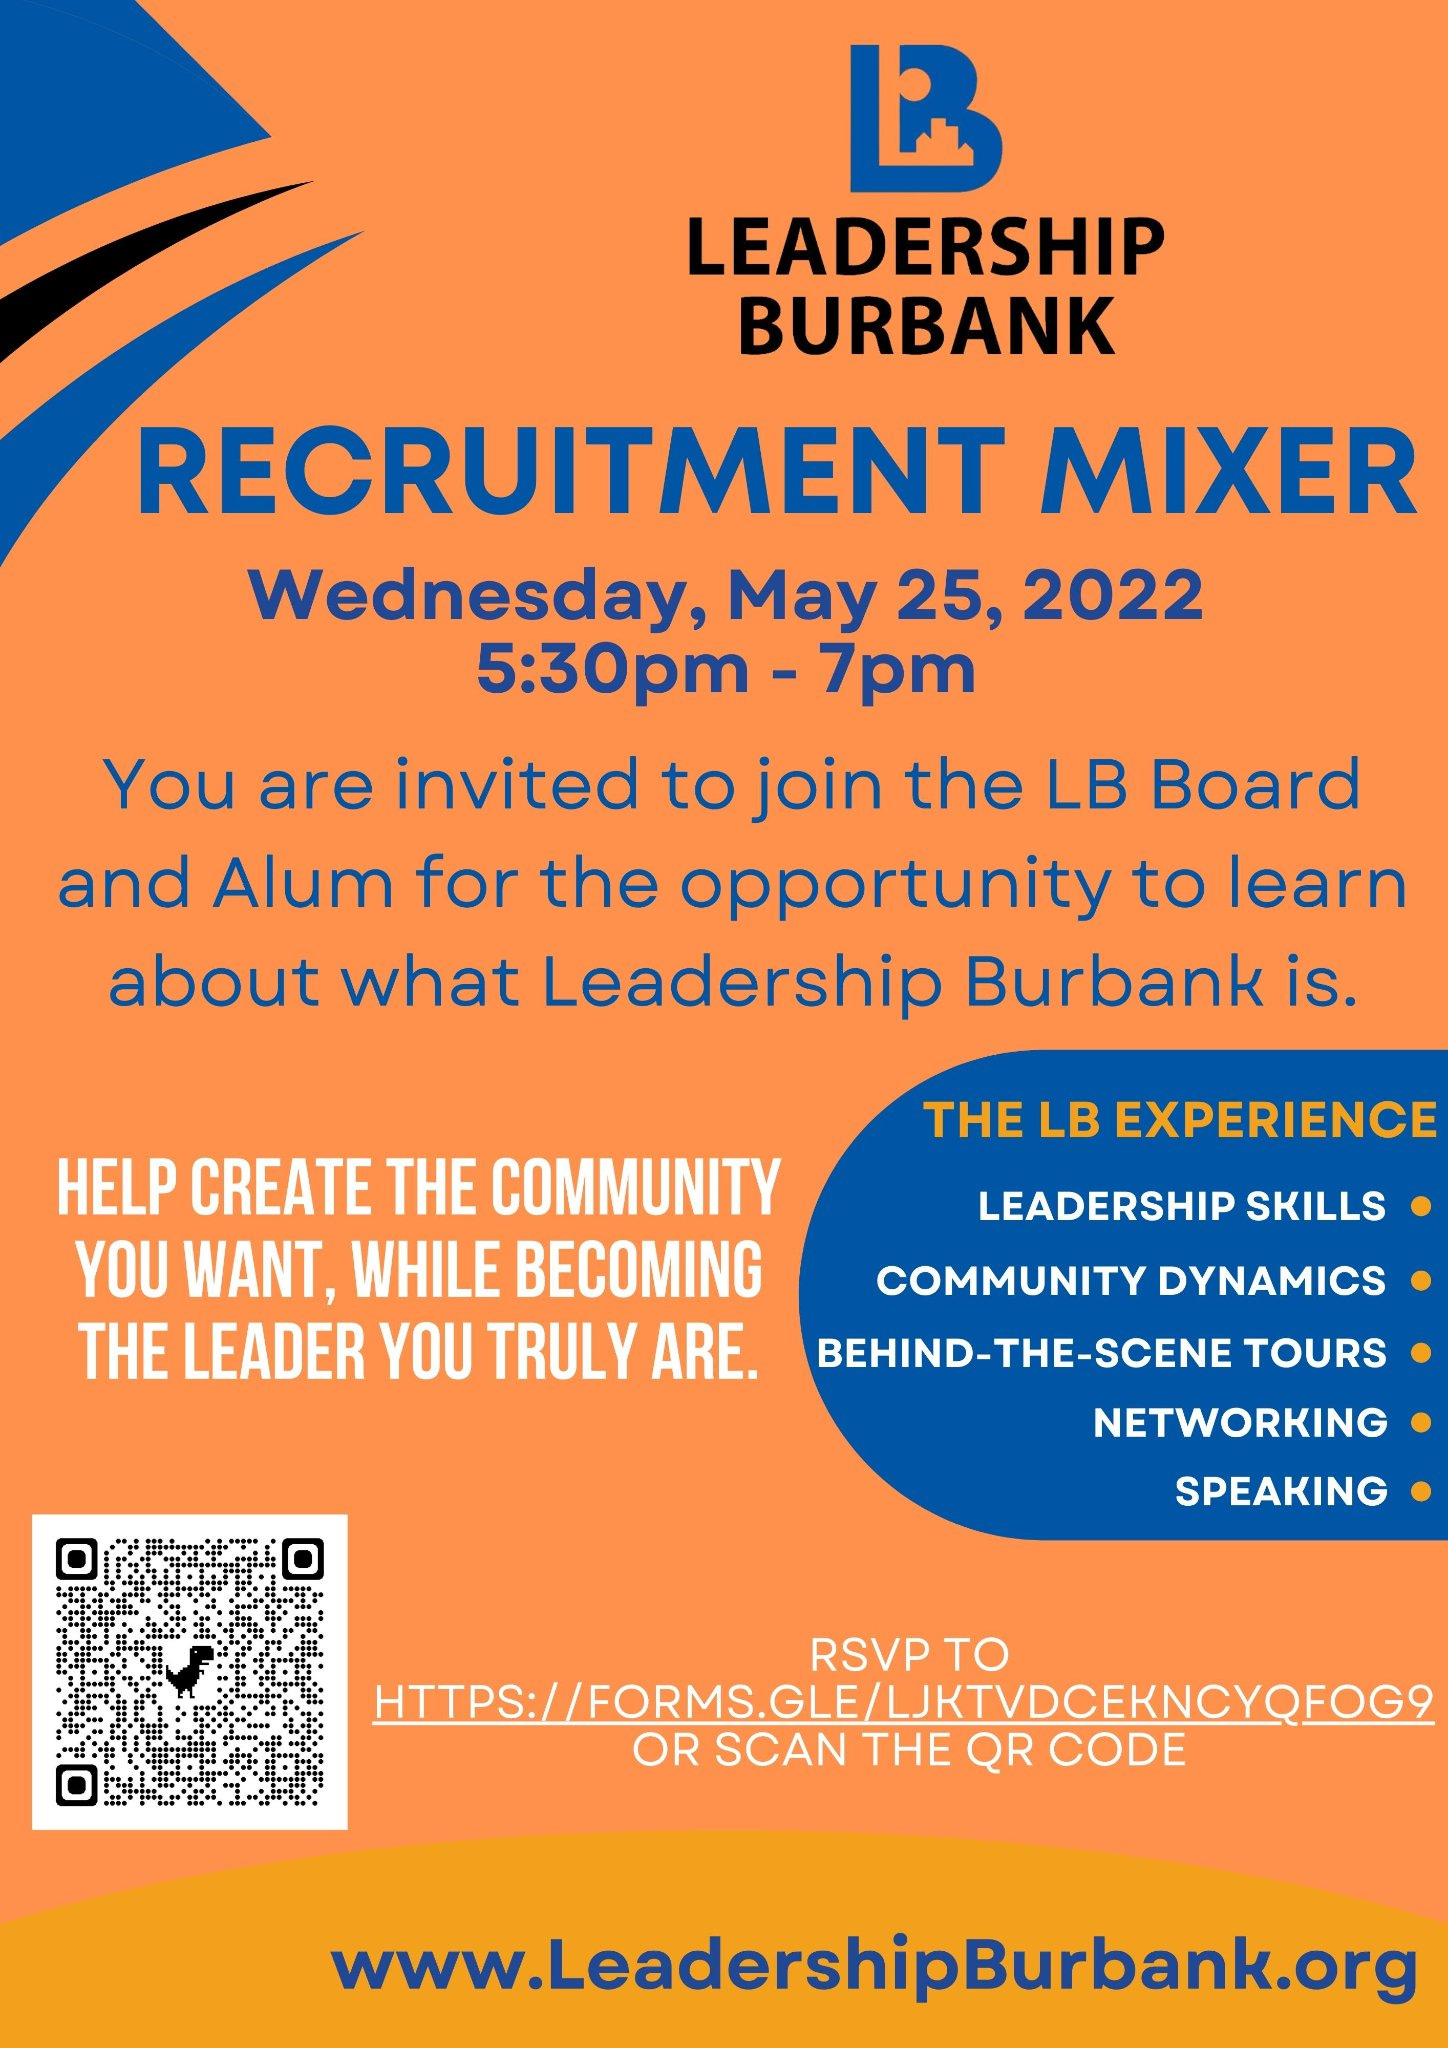 May be an image of text that says 'B LEADERSHIP BURBANK RECRUITMENT MIXER Wednesday, May 25, 2022 5:30pm 7pm You are invited to join the LB Board and Alum for the opportunity to learn about what Leadership Burbank is. THE LB EXPERIENCE HELP CREATE THE COMMUNITY YOU WANT, WHILE BECOMING THE LEADER YOU TRULY ARE. LEADERSHIP SKILLS COMMUNITY DYNAMICS BEHIND-THE-SCENE TOURS NETWORKING SPEAKING RSVP TO HTTPS//RMS.BLELITIDCEKNCYGFOG9 OR SCAN THE QR CODE www.LeadershipBurbank.org'